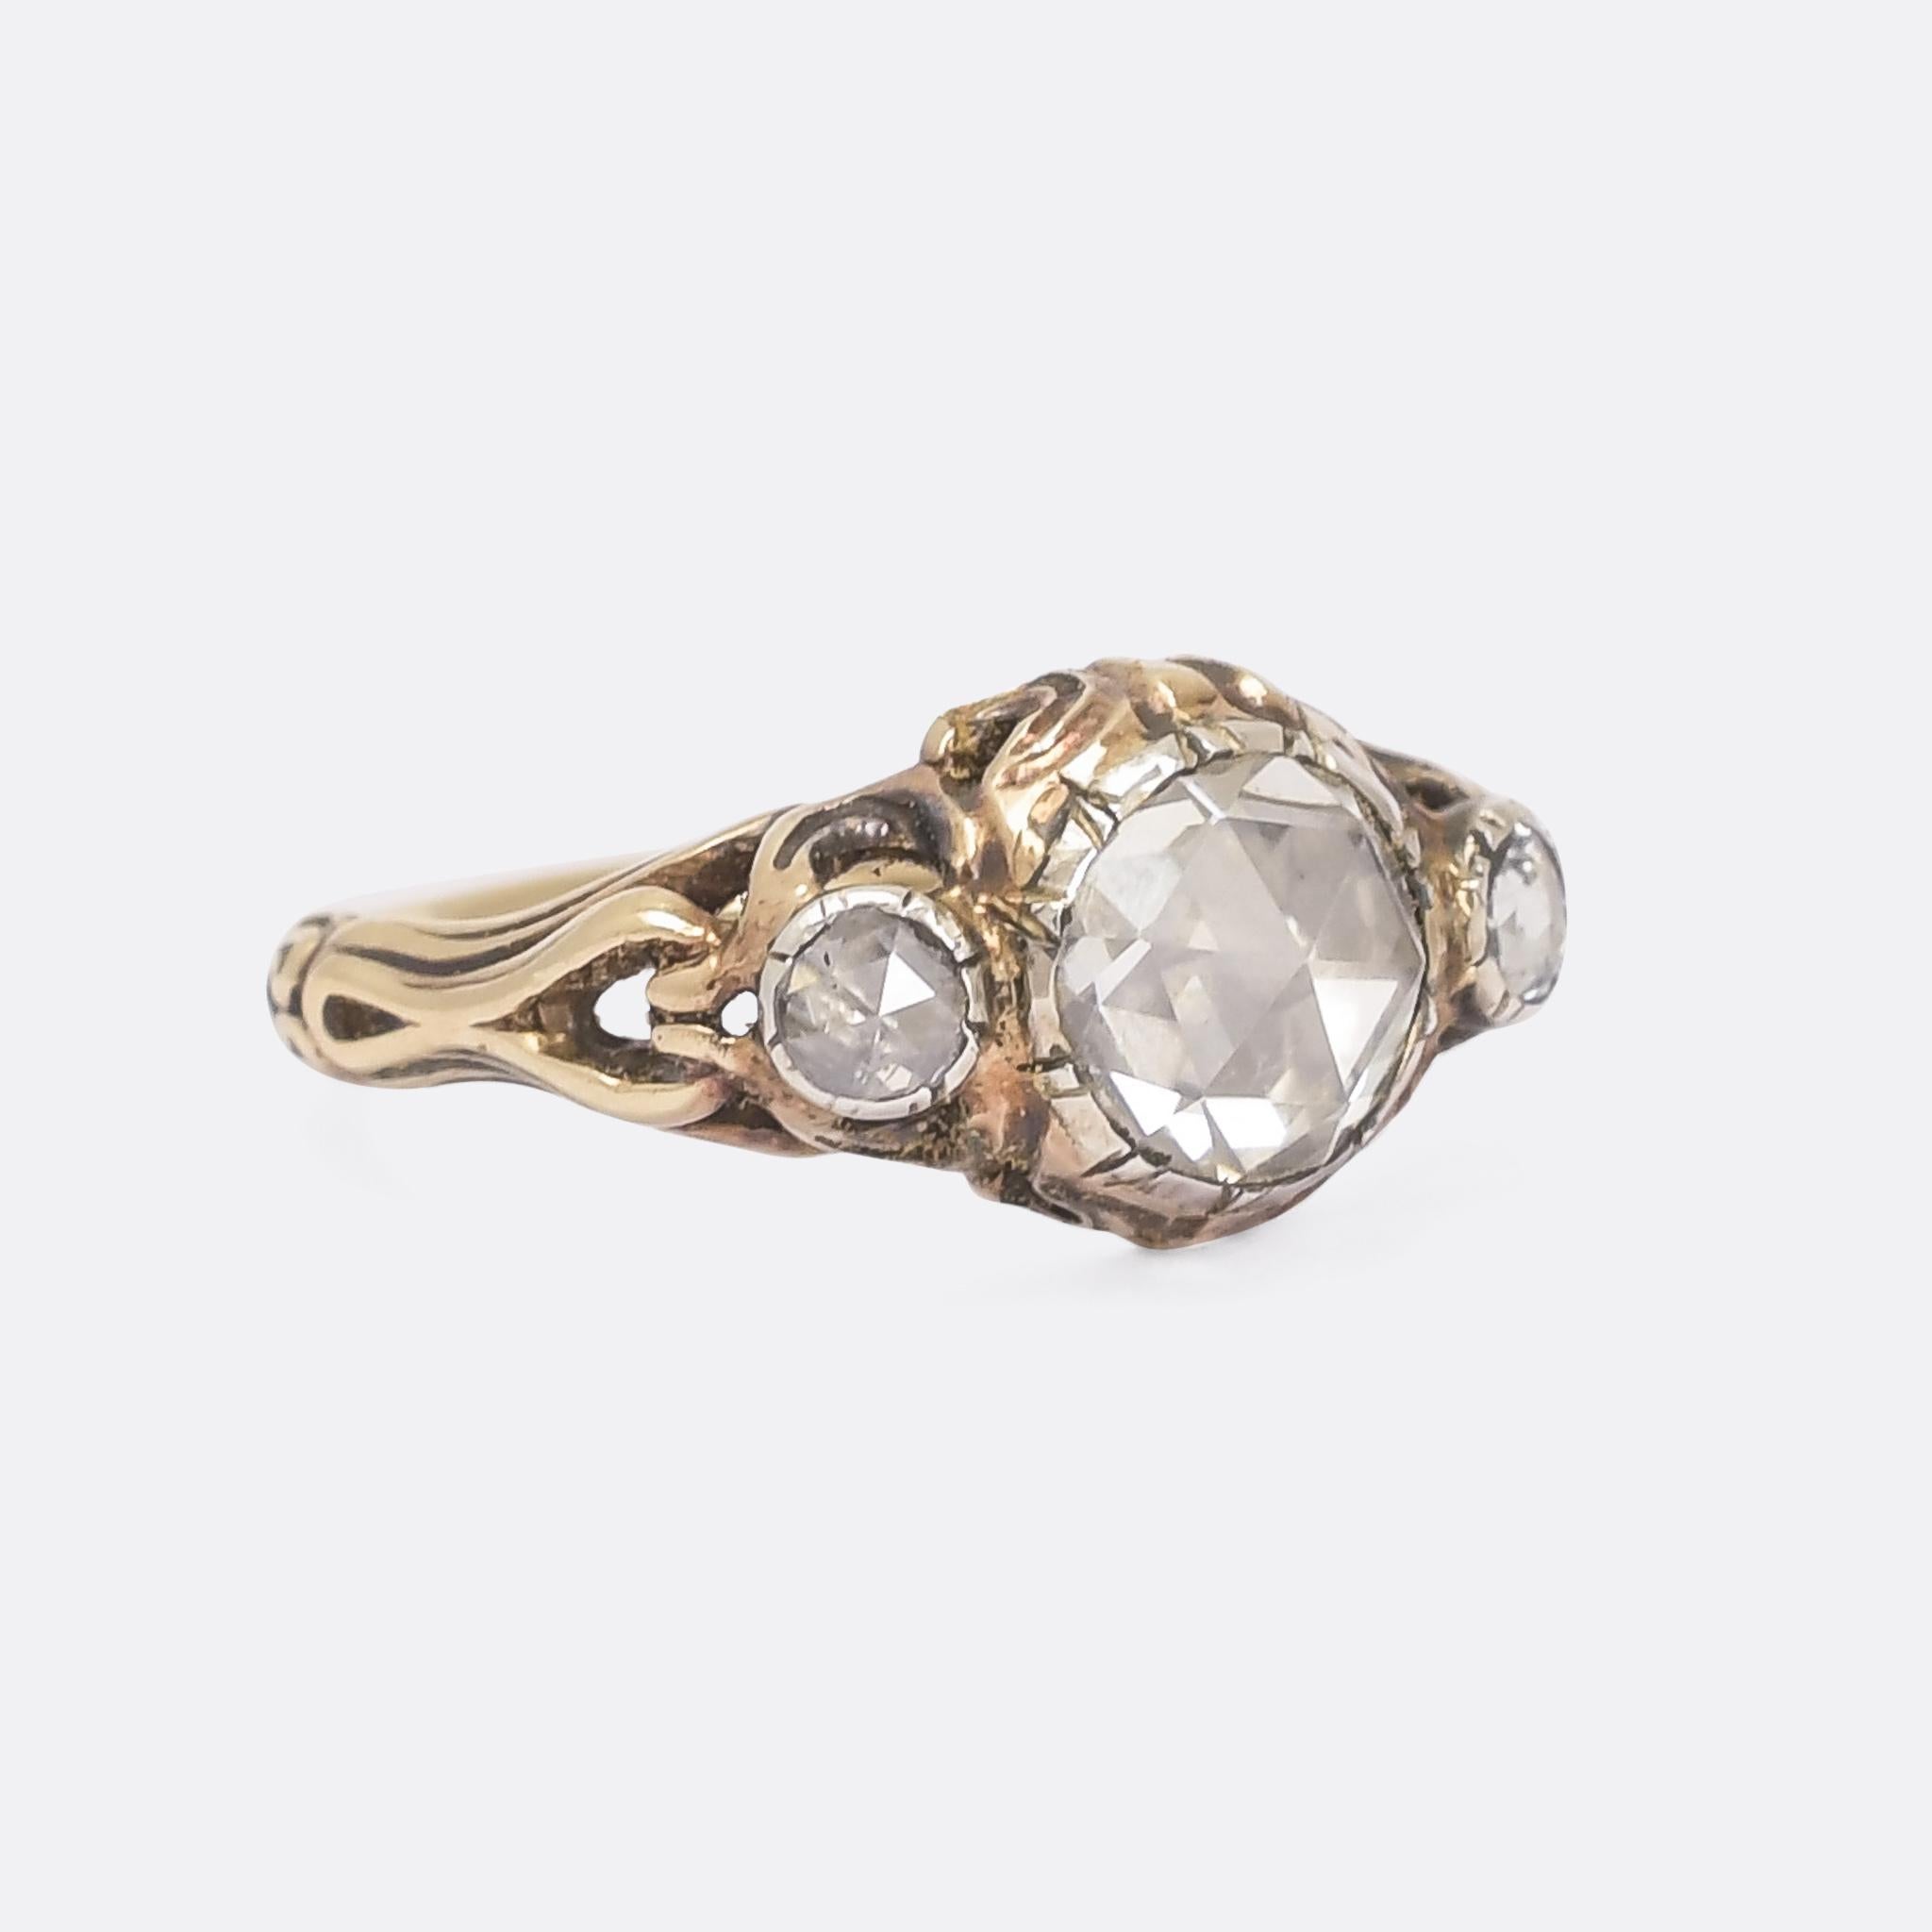 The most incredible Georgian rose cut diamond three-stone ring dating from the early 19th Century, circa 1800. The diamonds are highly domed, bright, and beautifully cut, resting in foil-backed cut down silver settings that reflect the light back